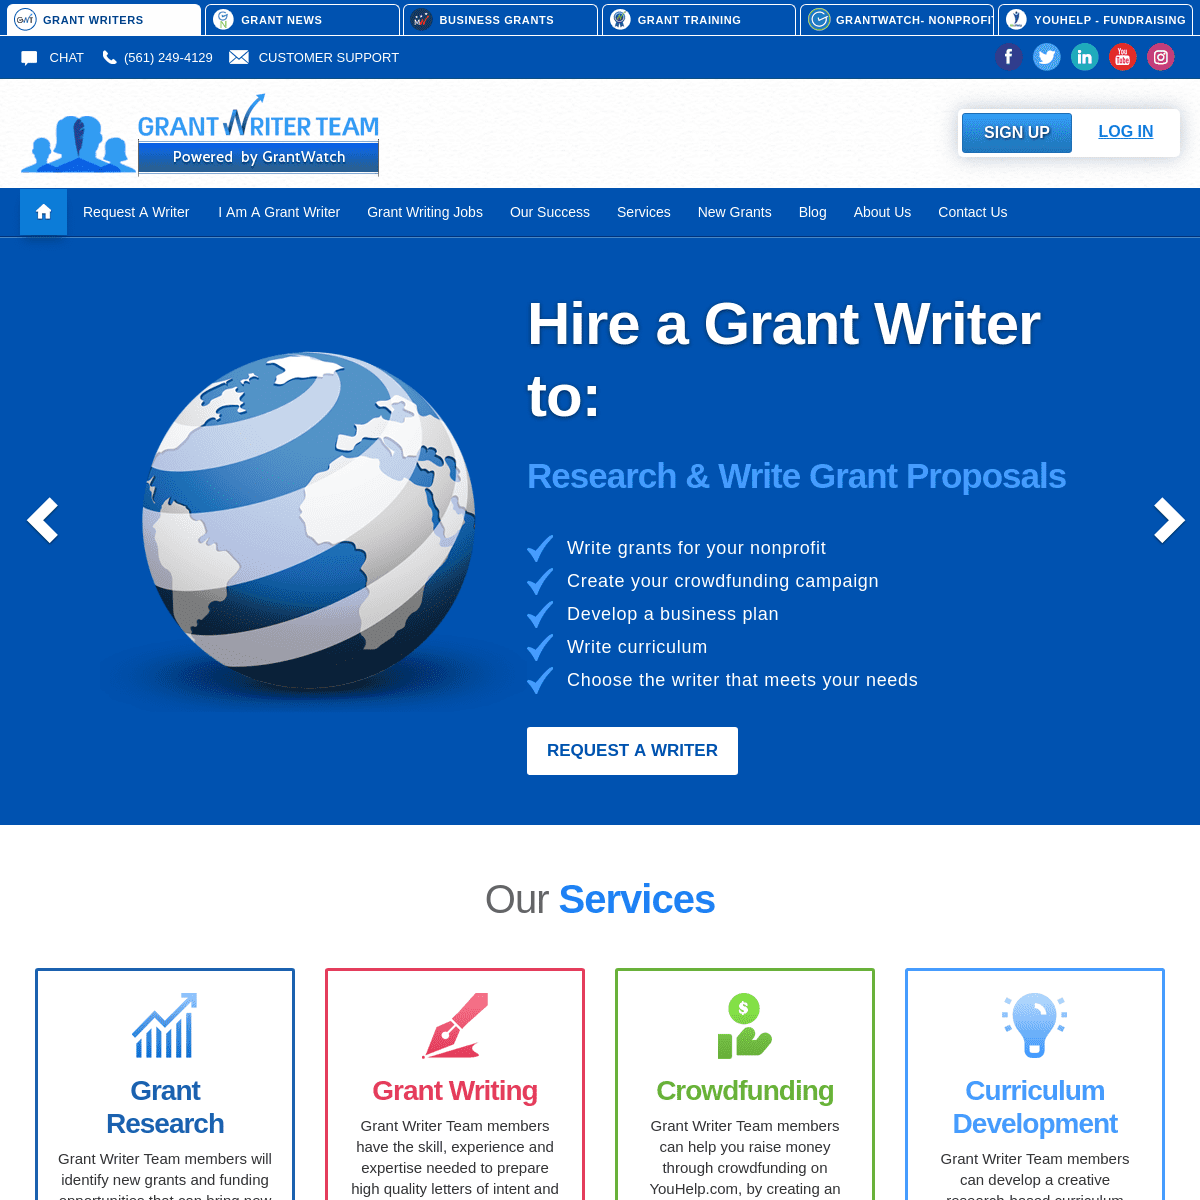 Grant Writers For Hire - Grant Writer Team